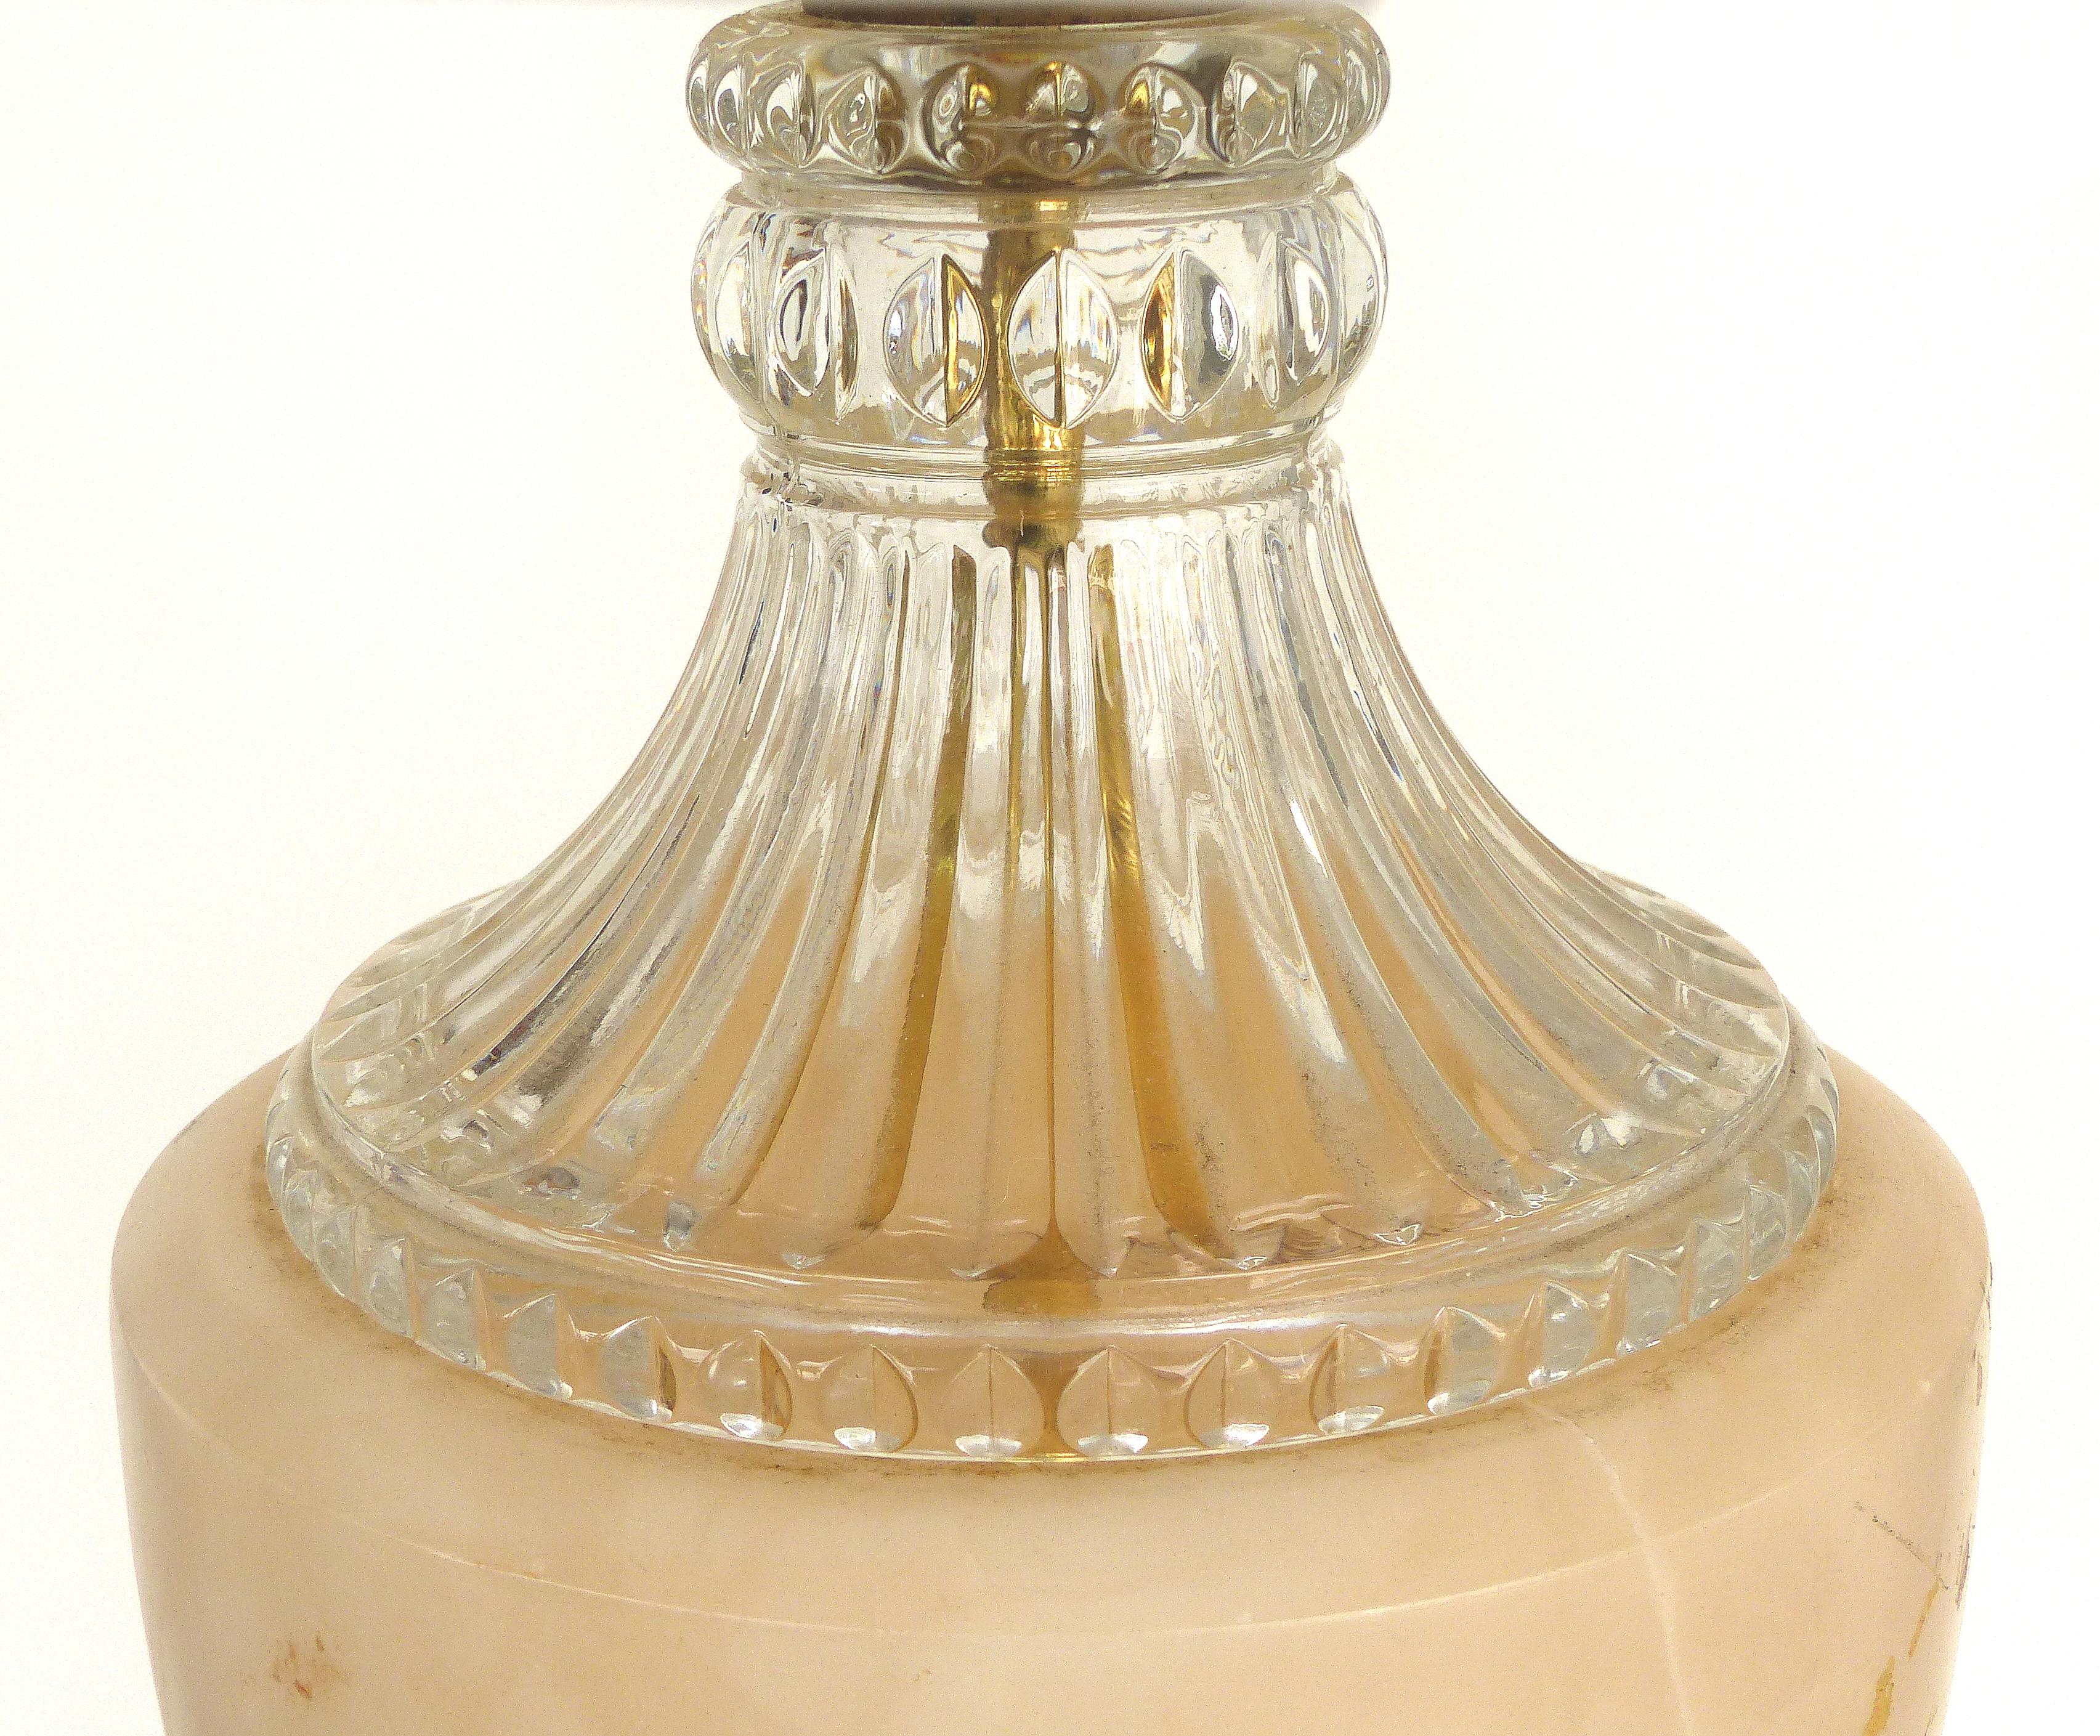 20th Century Traditional Alabaster Urn Form Table Lamps with Glass and Crystal Accents, Pair